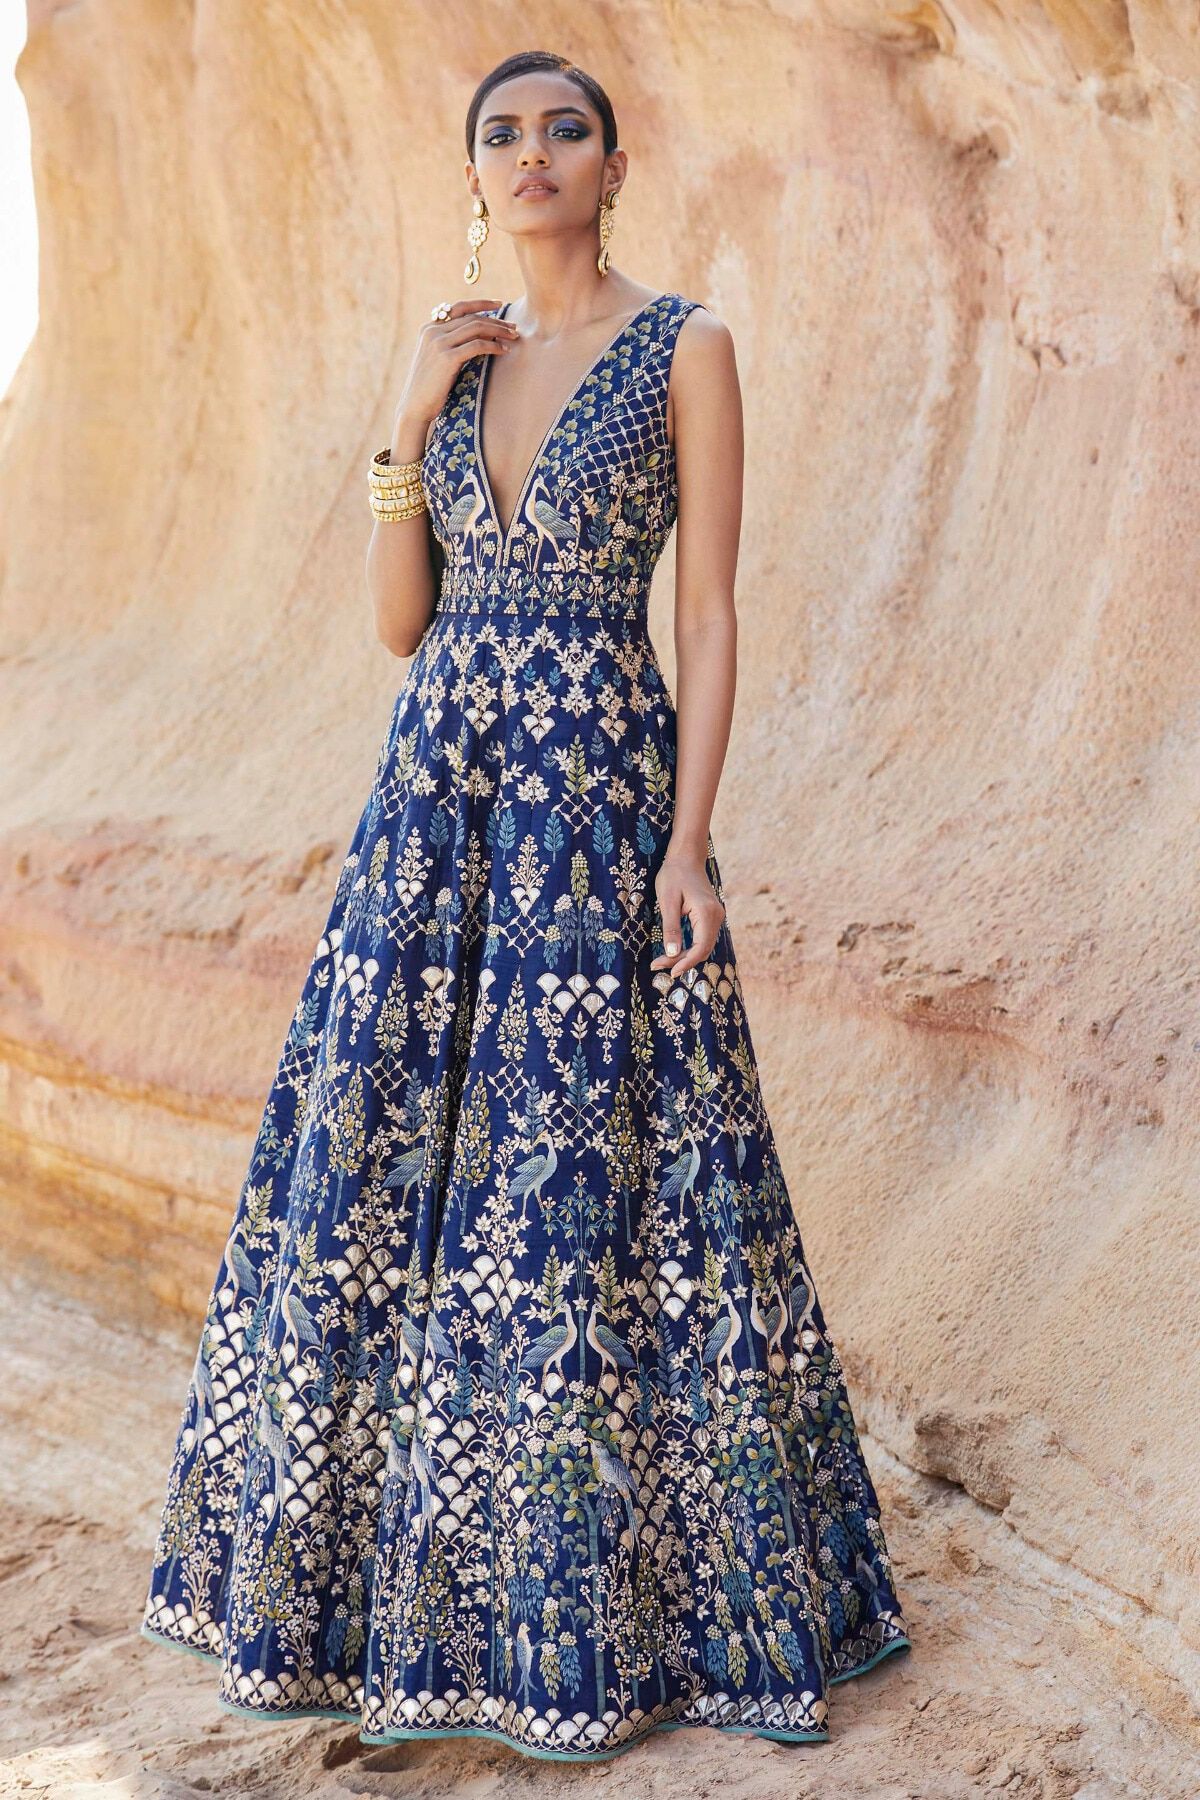 Anita Dongre Just Dropped Her New Collection and It Is #WeddingGoals! - The  Urban Life